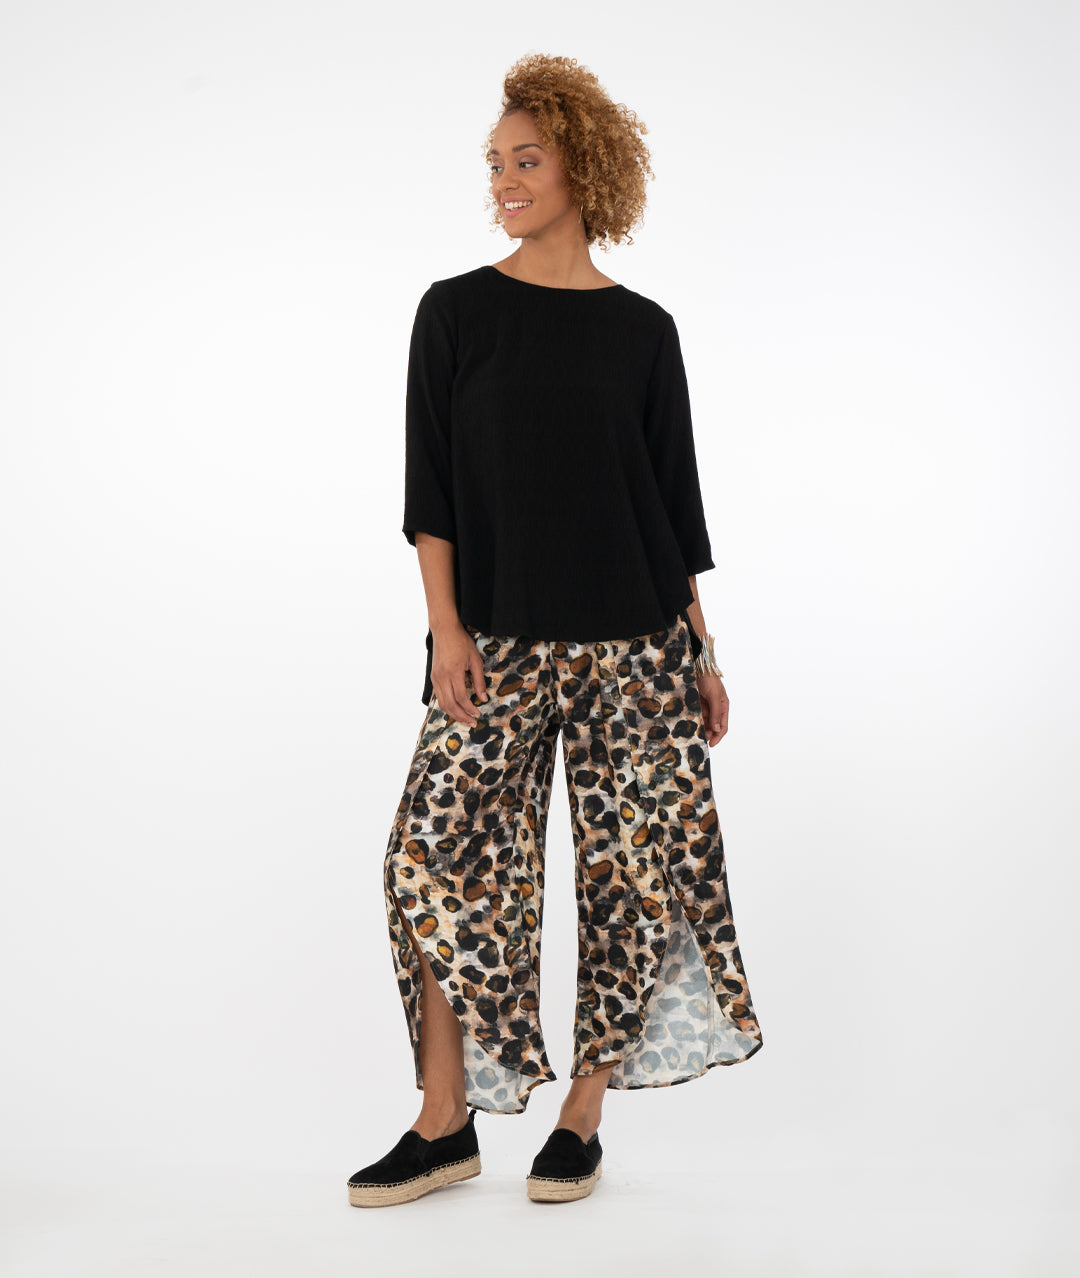 model in a solid black top with animal print pants in front of a white background